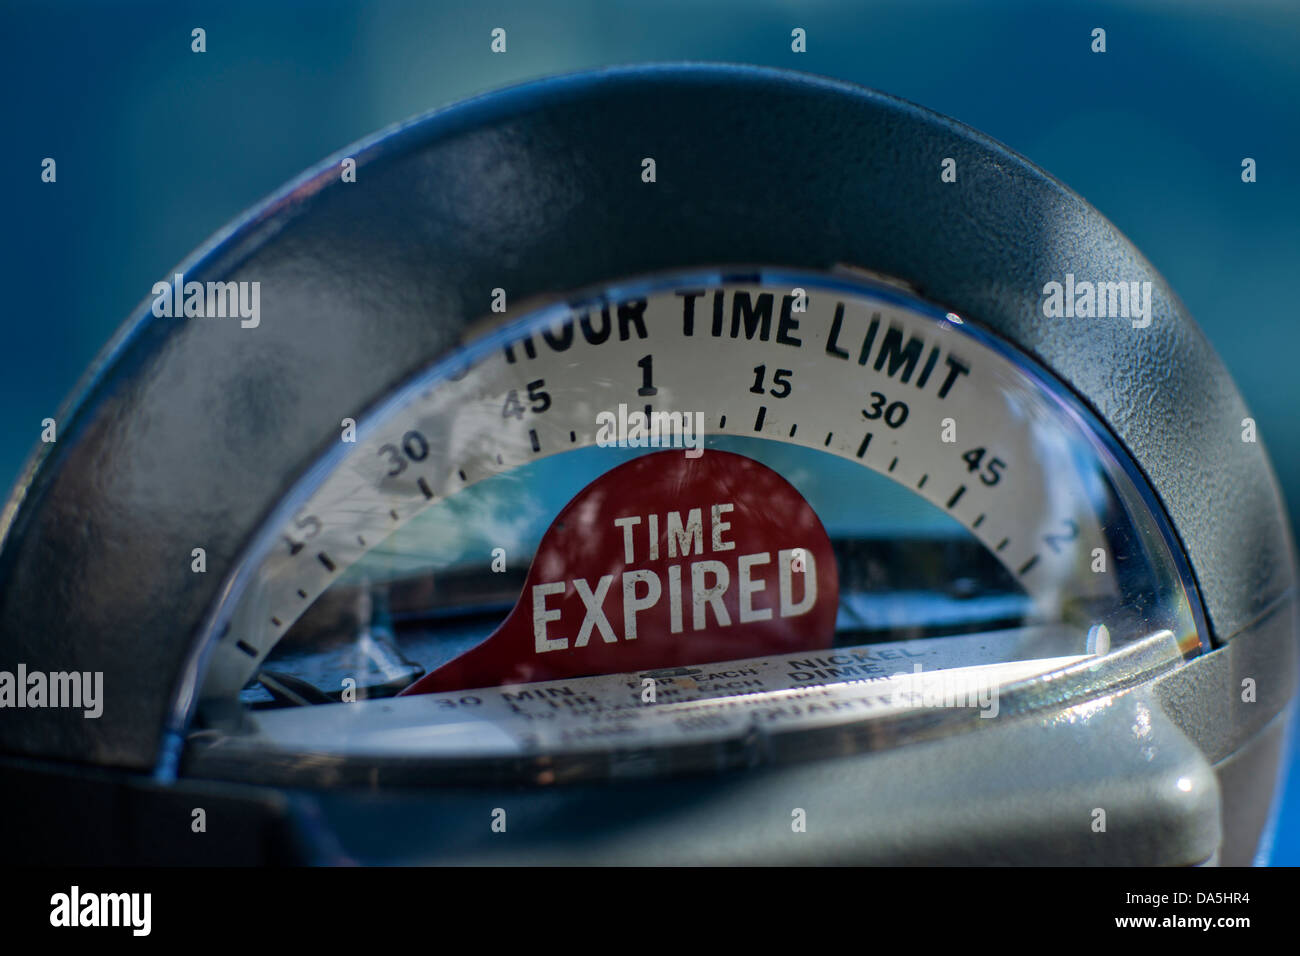 TIME EXPIRED ON ANALOG MECHANICAL PARKING METER Stock Photo